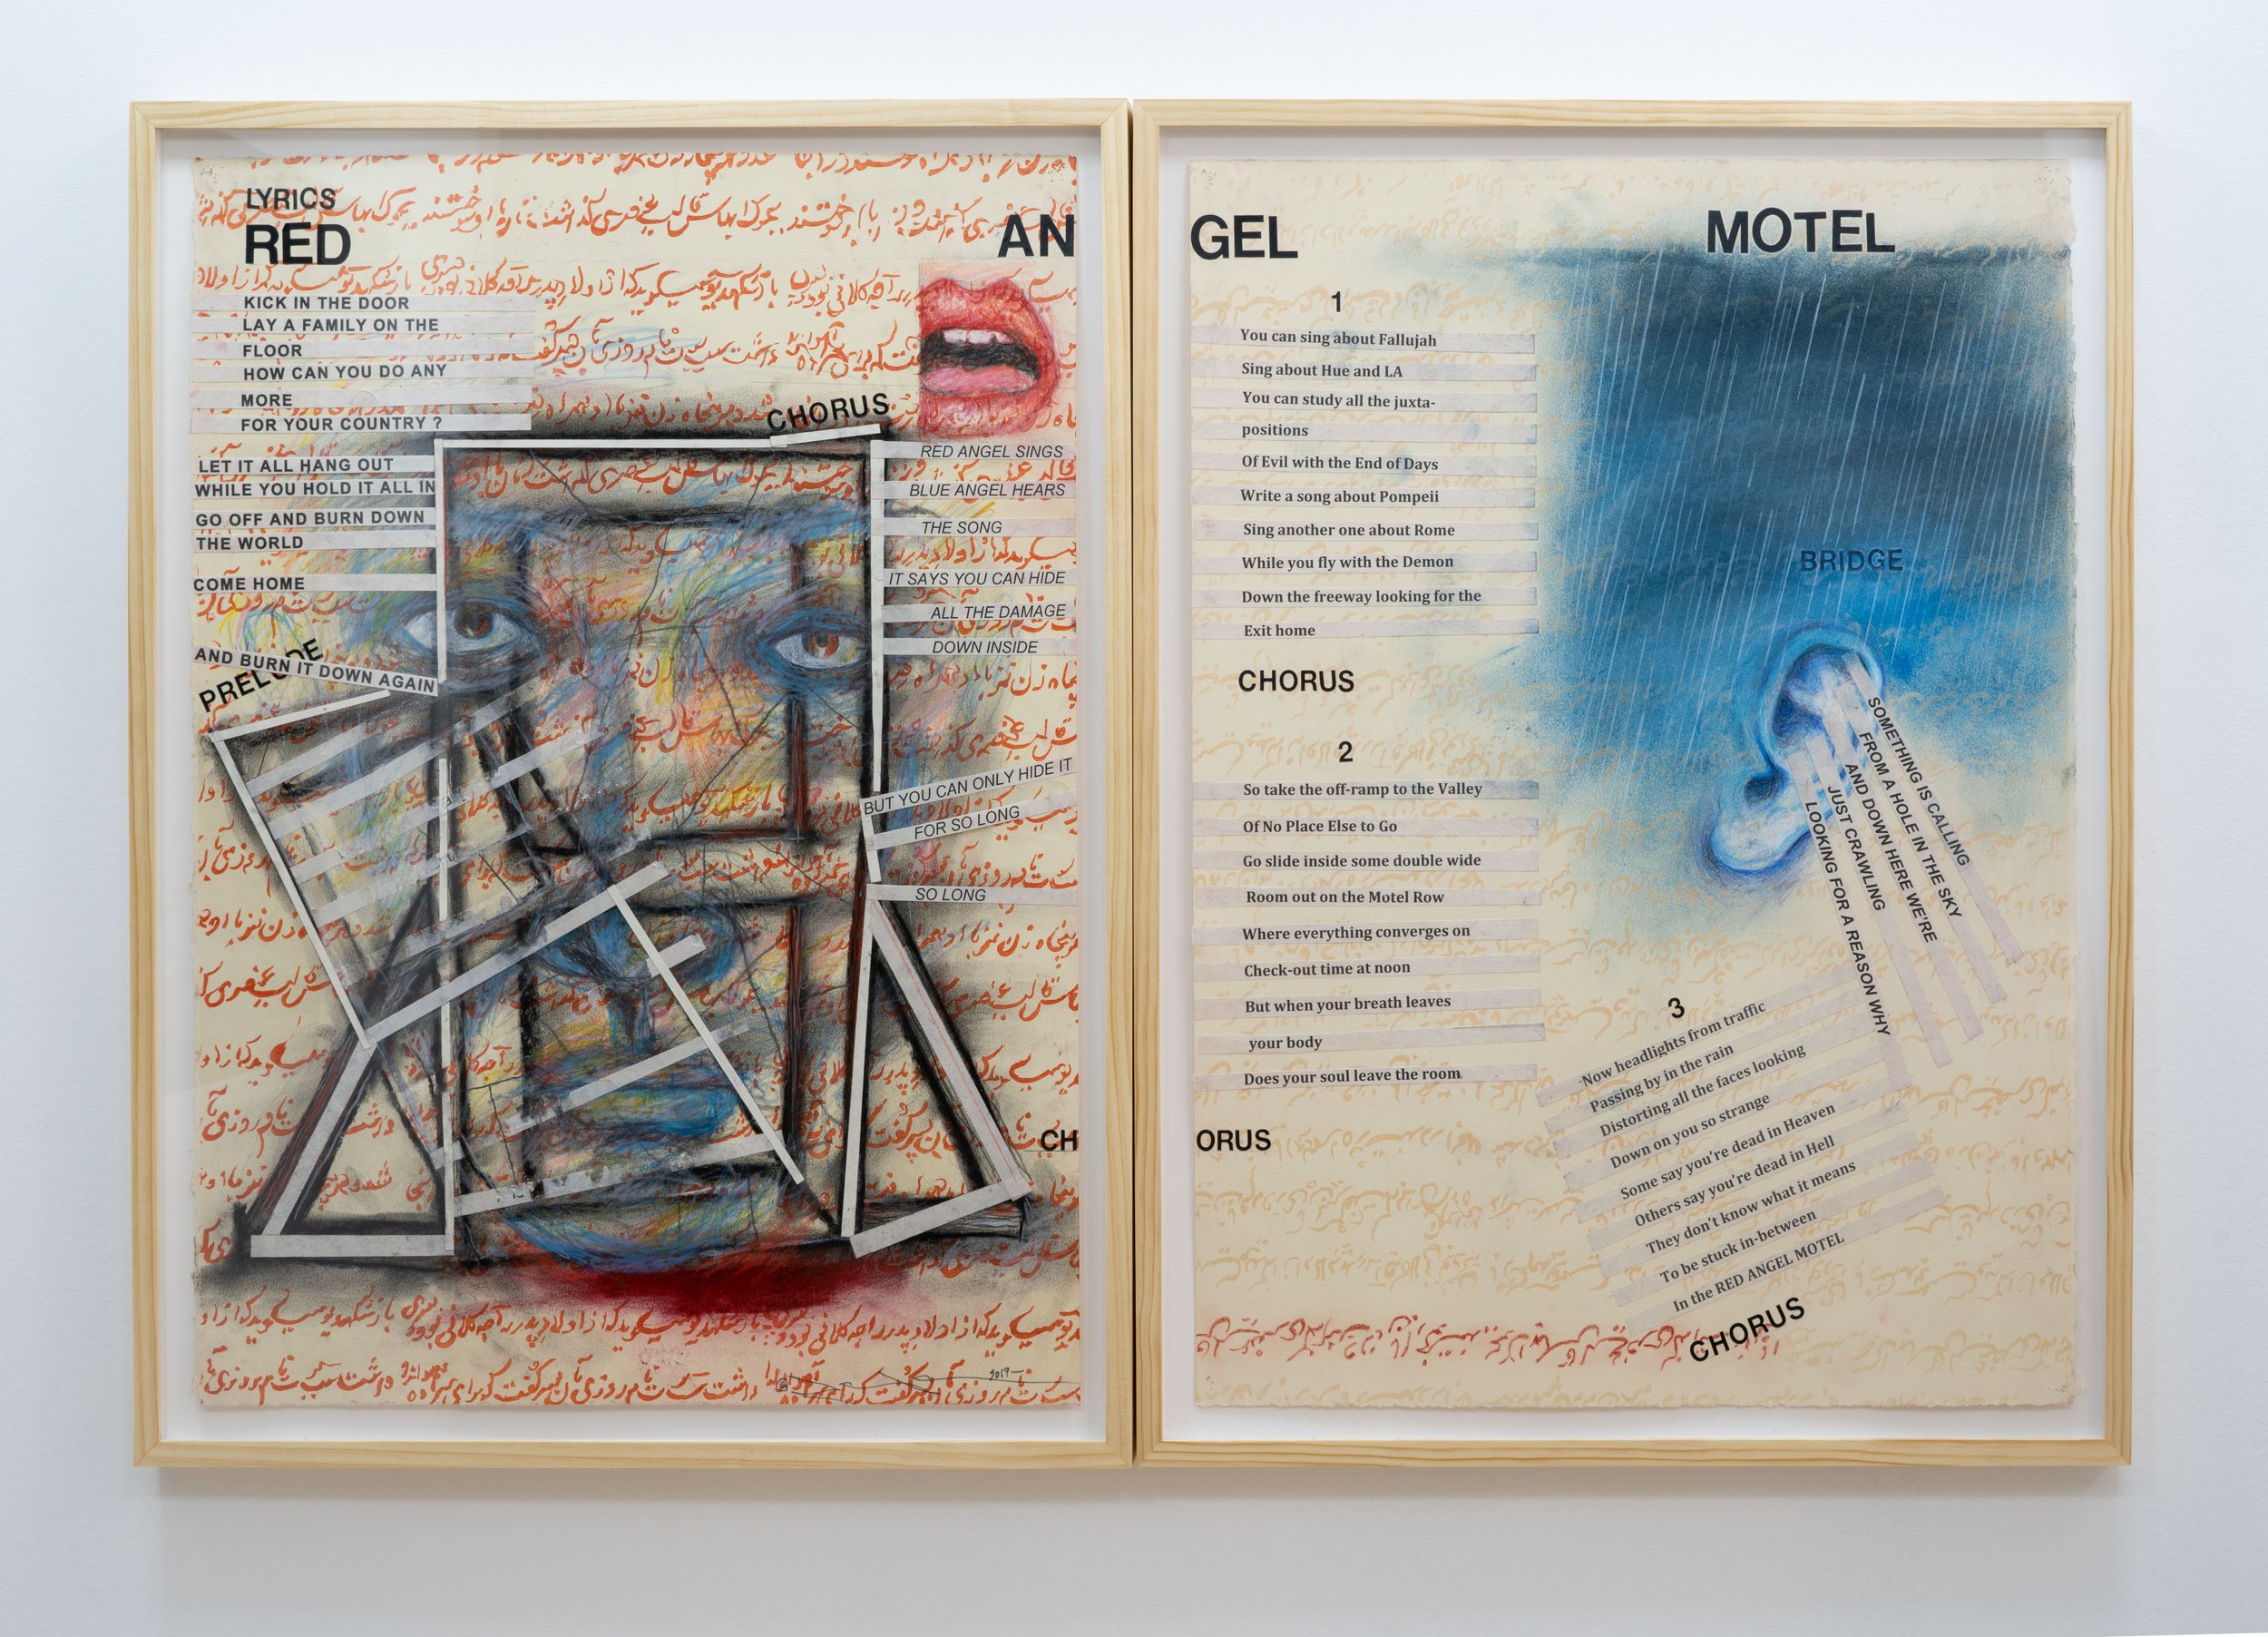   Terry Allen   Red Angel Motel,  2019 Mixed media on paper, 2 panels, 32 ¾ x 24 ¾ inches each  Courtesy of the artist and L.A. Louver Gallery 